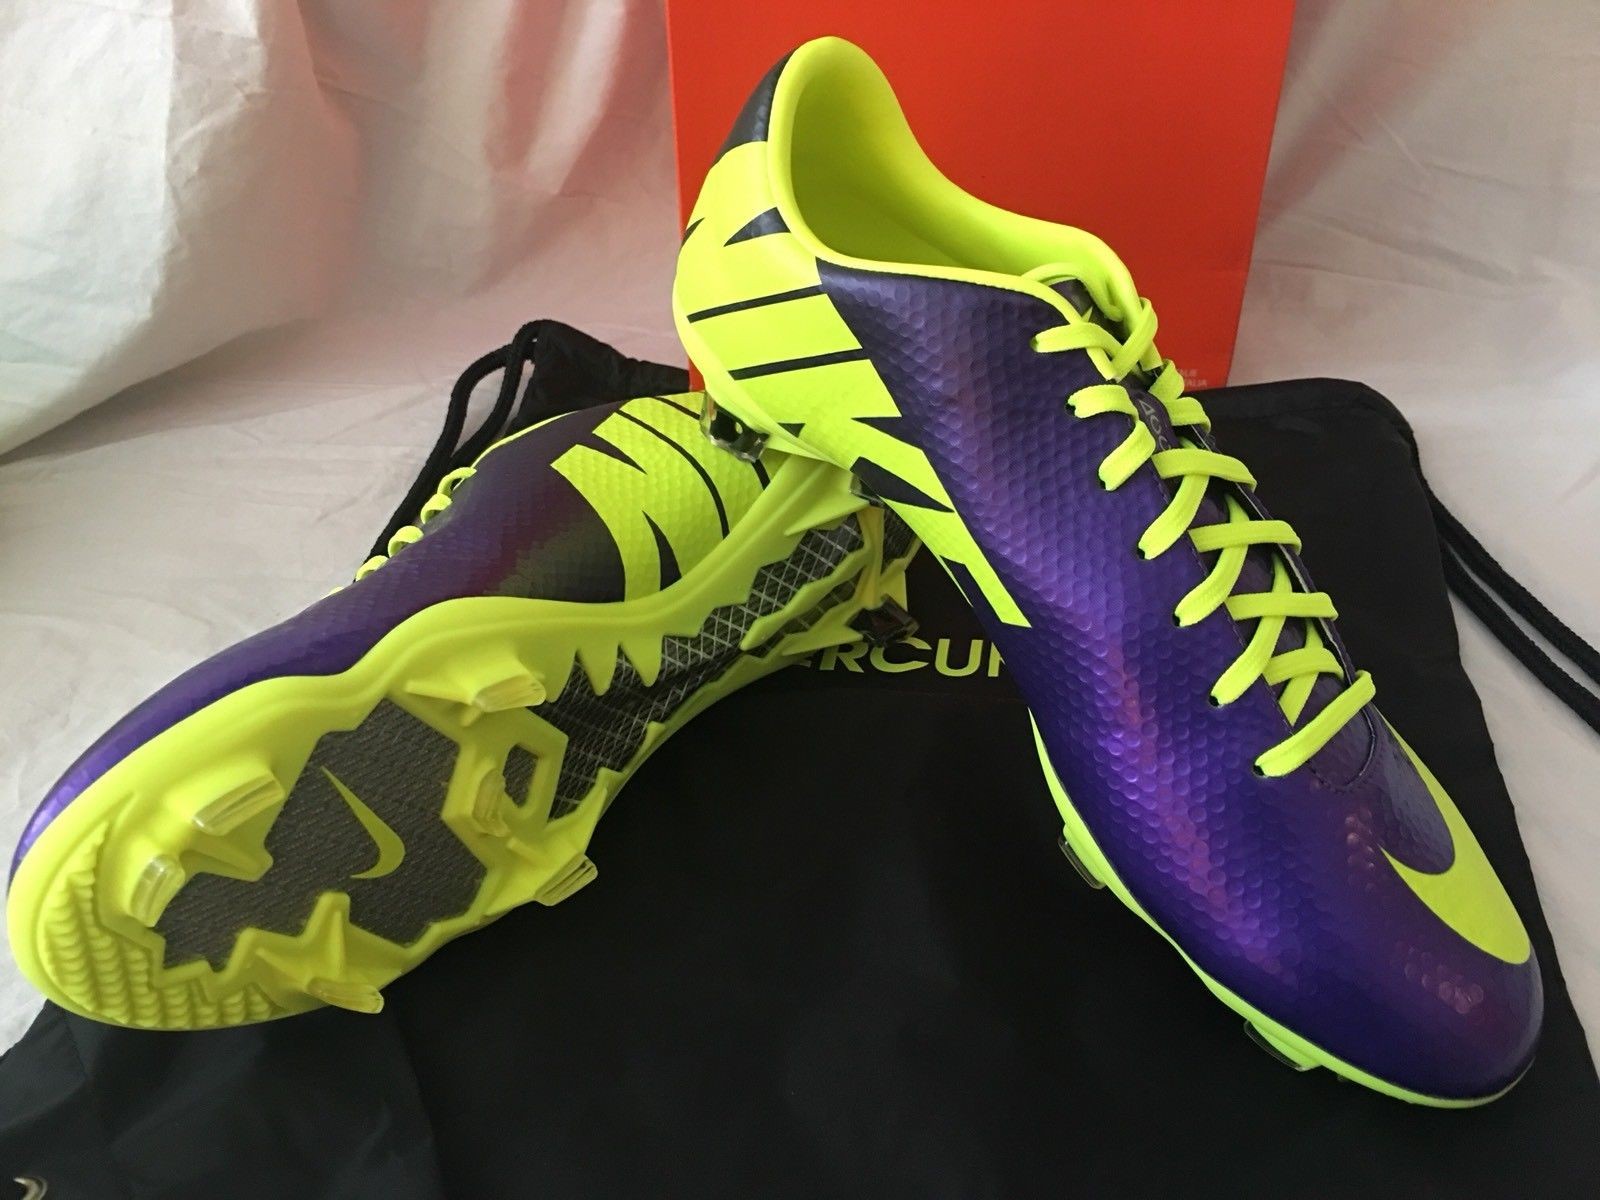 WHAT'S THE DIFFERENCE NIKE MERCURIAL VAPOR 13